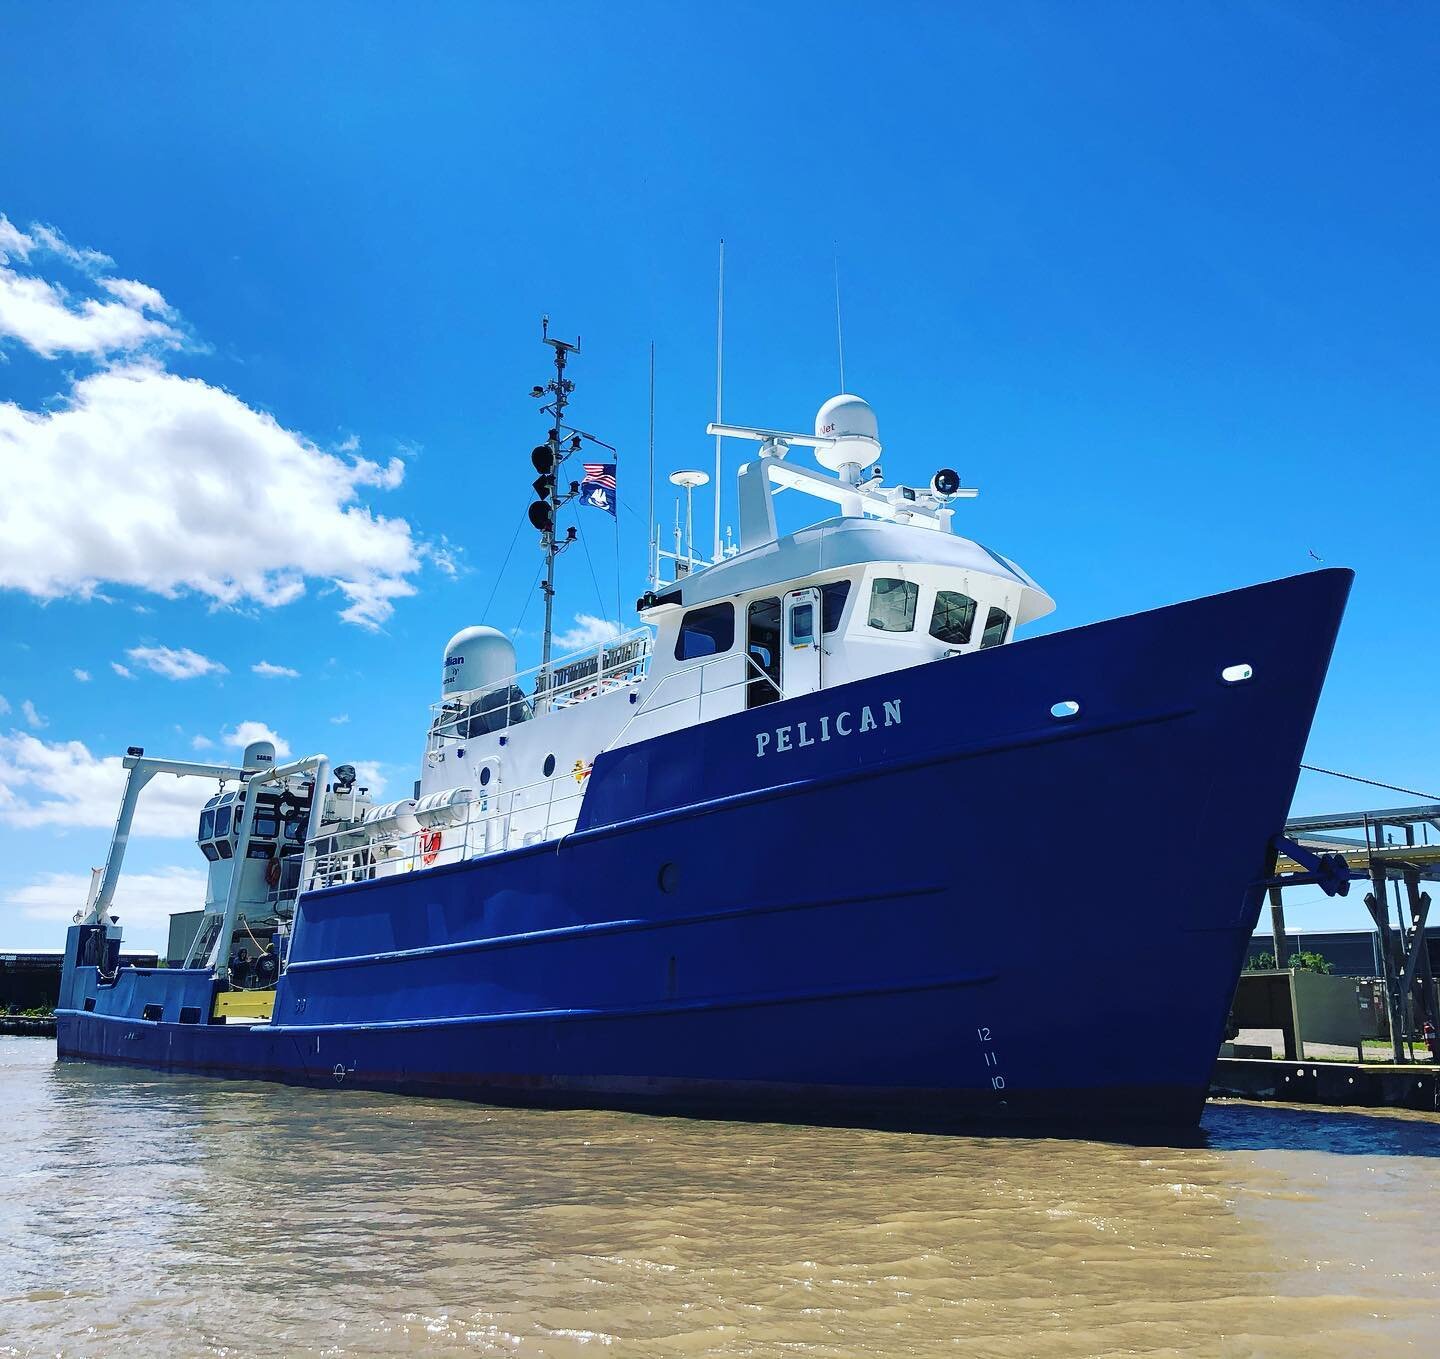 The #RVPelican was looking really sharp in the #mississippiriverdelta this morning. It was definitely reminiscent of #jacquescousteau and his ship, the #Calyspo #lumconscience #researchvessel #gulfofmexico #MississippiRiver